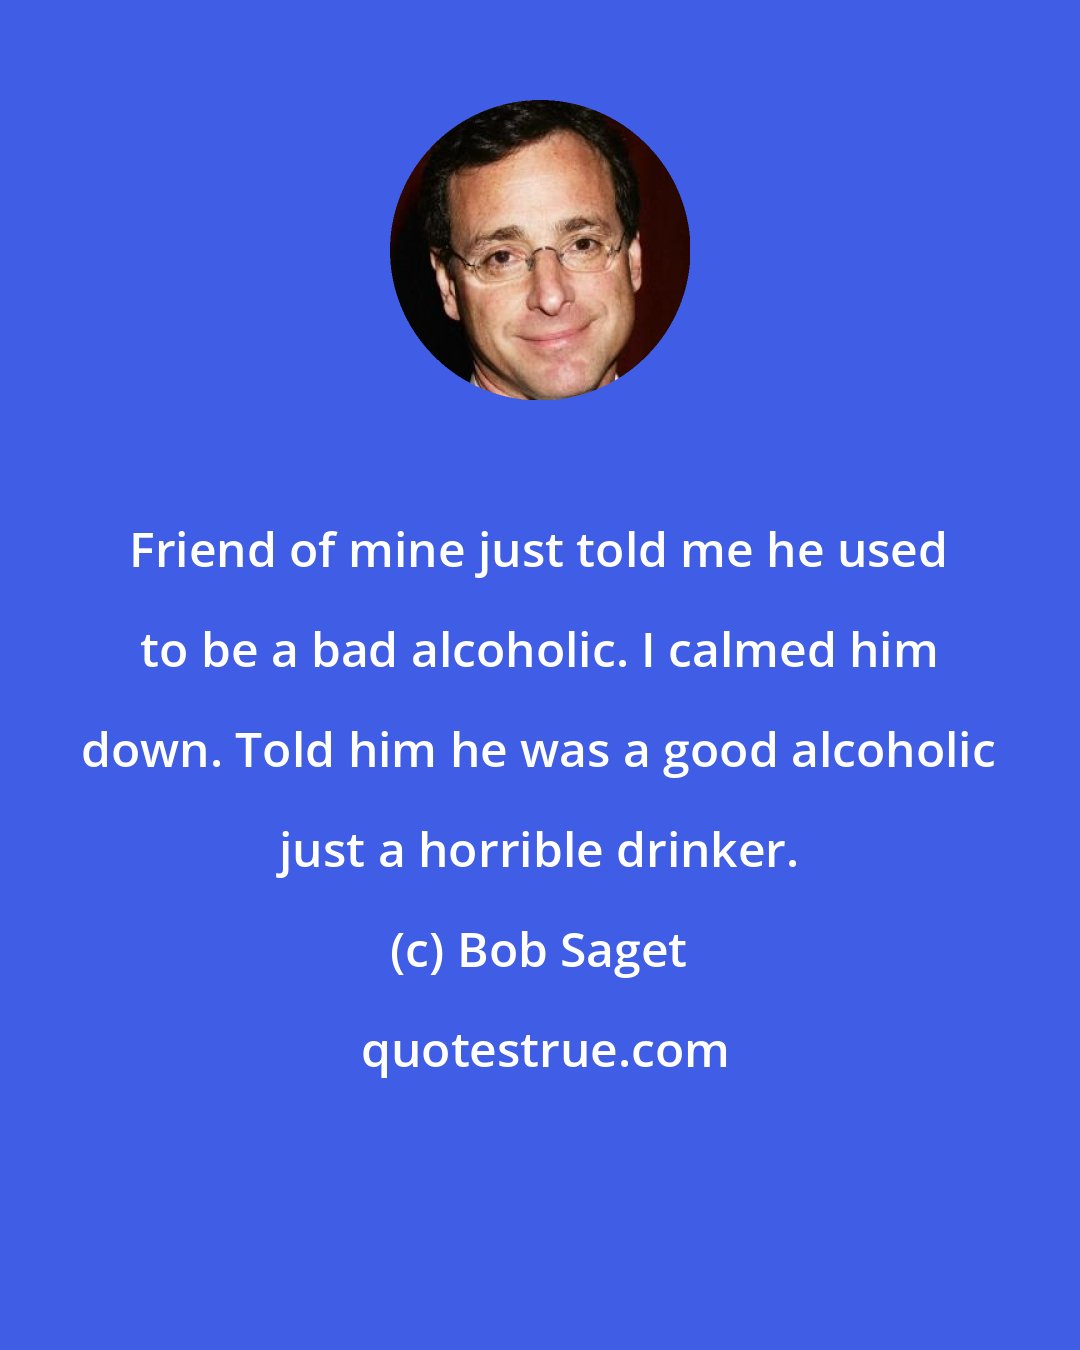 Bob Saget: Friend of mine just told me he used to be a bad alcoholic. I calmed him down. Told him he was a good alcoholic just a horrible drinker.